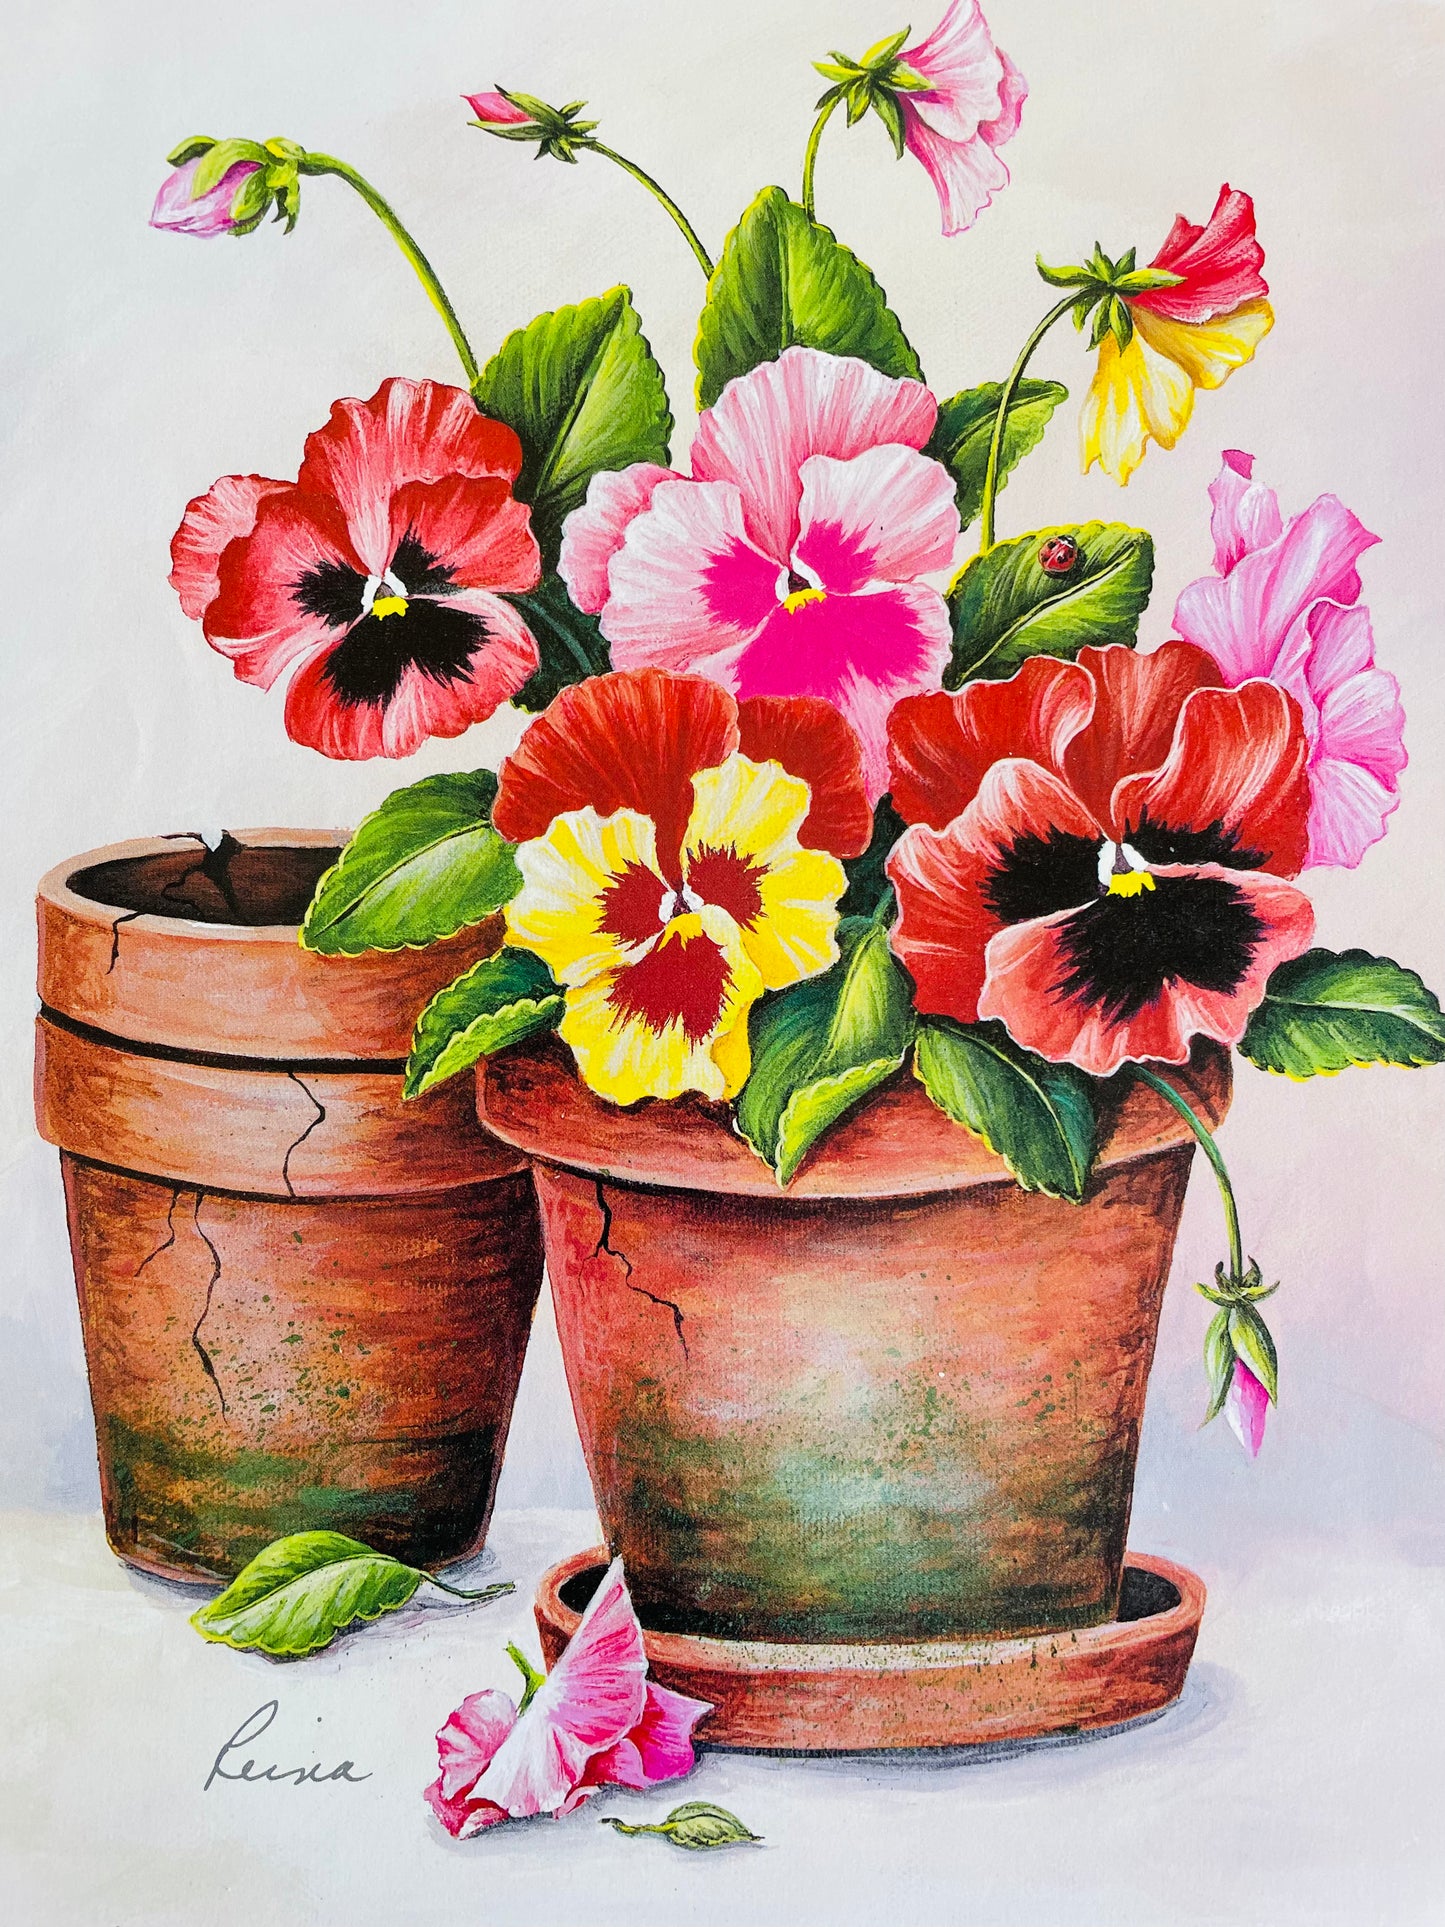 Pink-Red Pansies in Pots by Reina (2000) Manor Art - Floral Lithograph Print Ready for Framing!